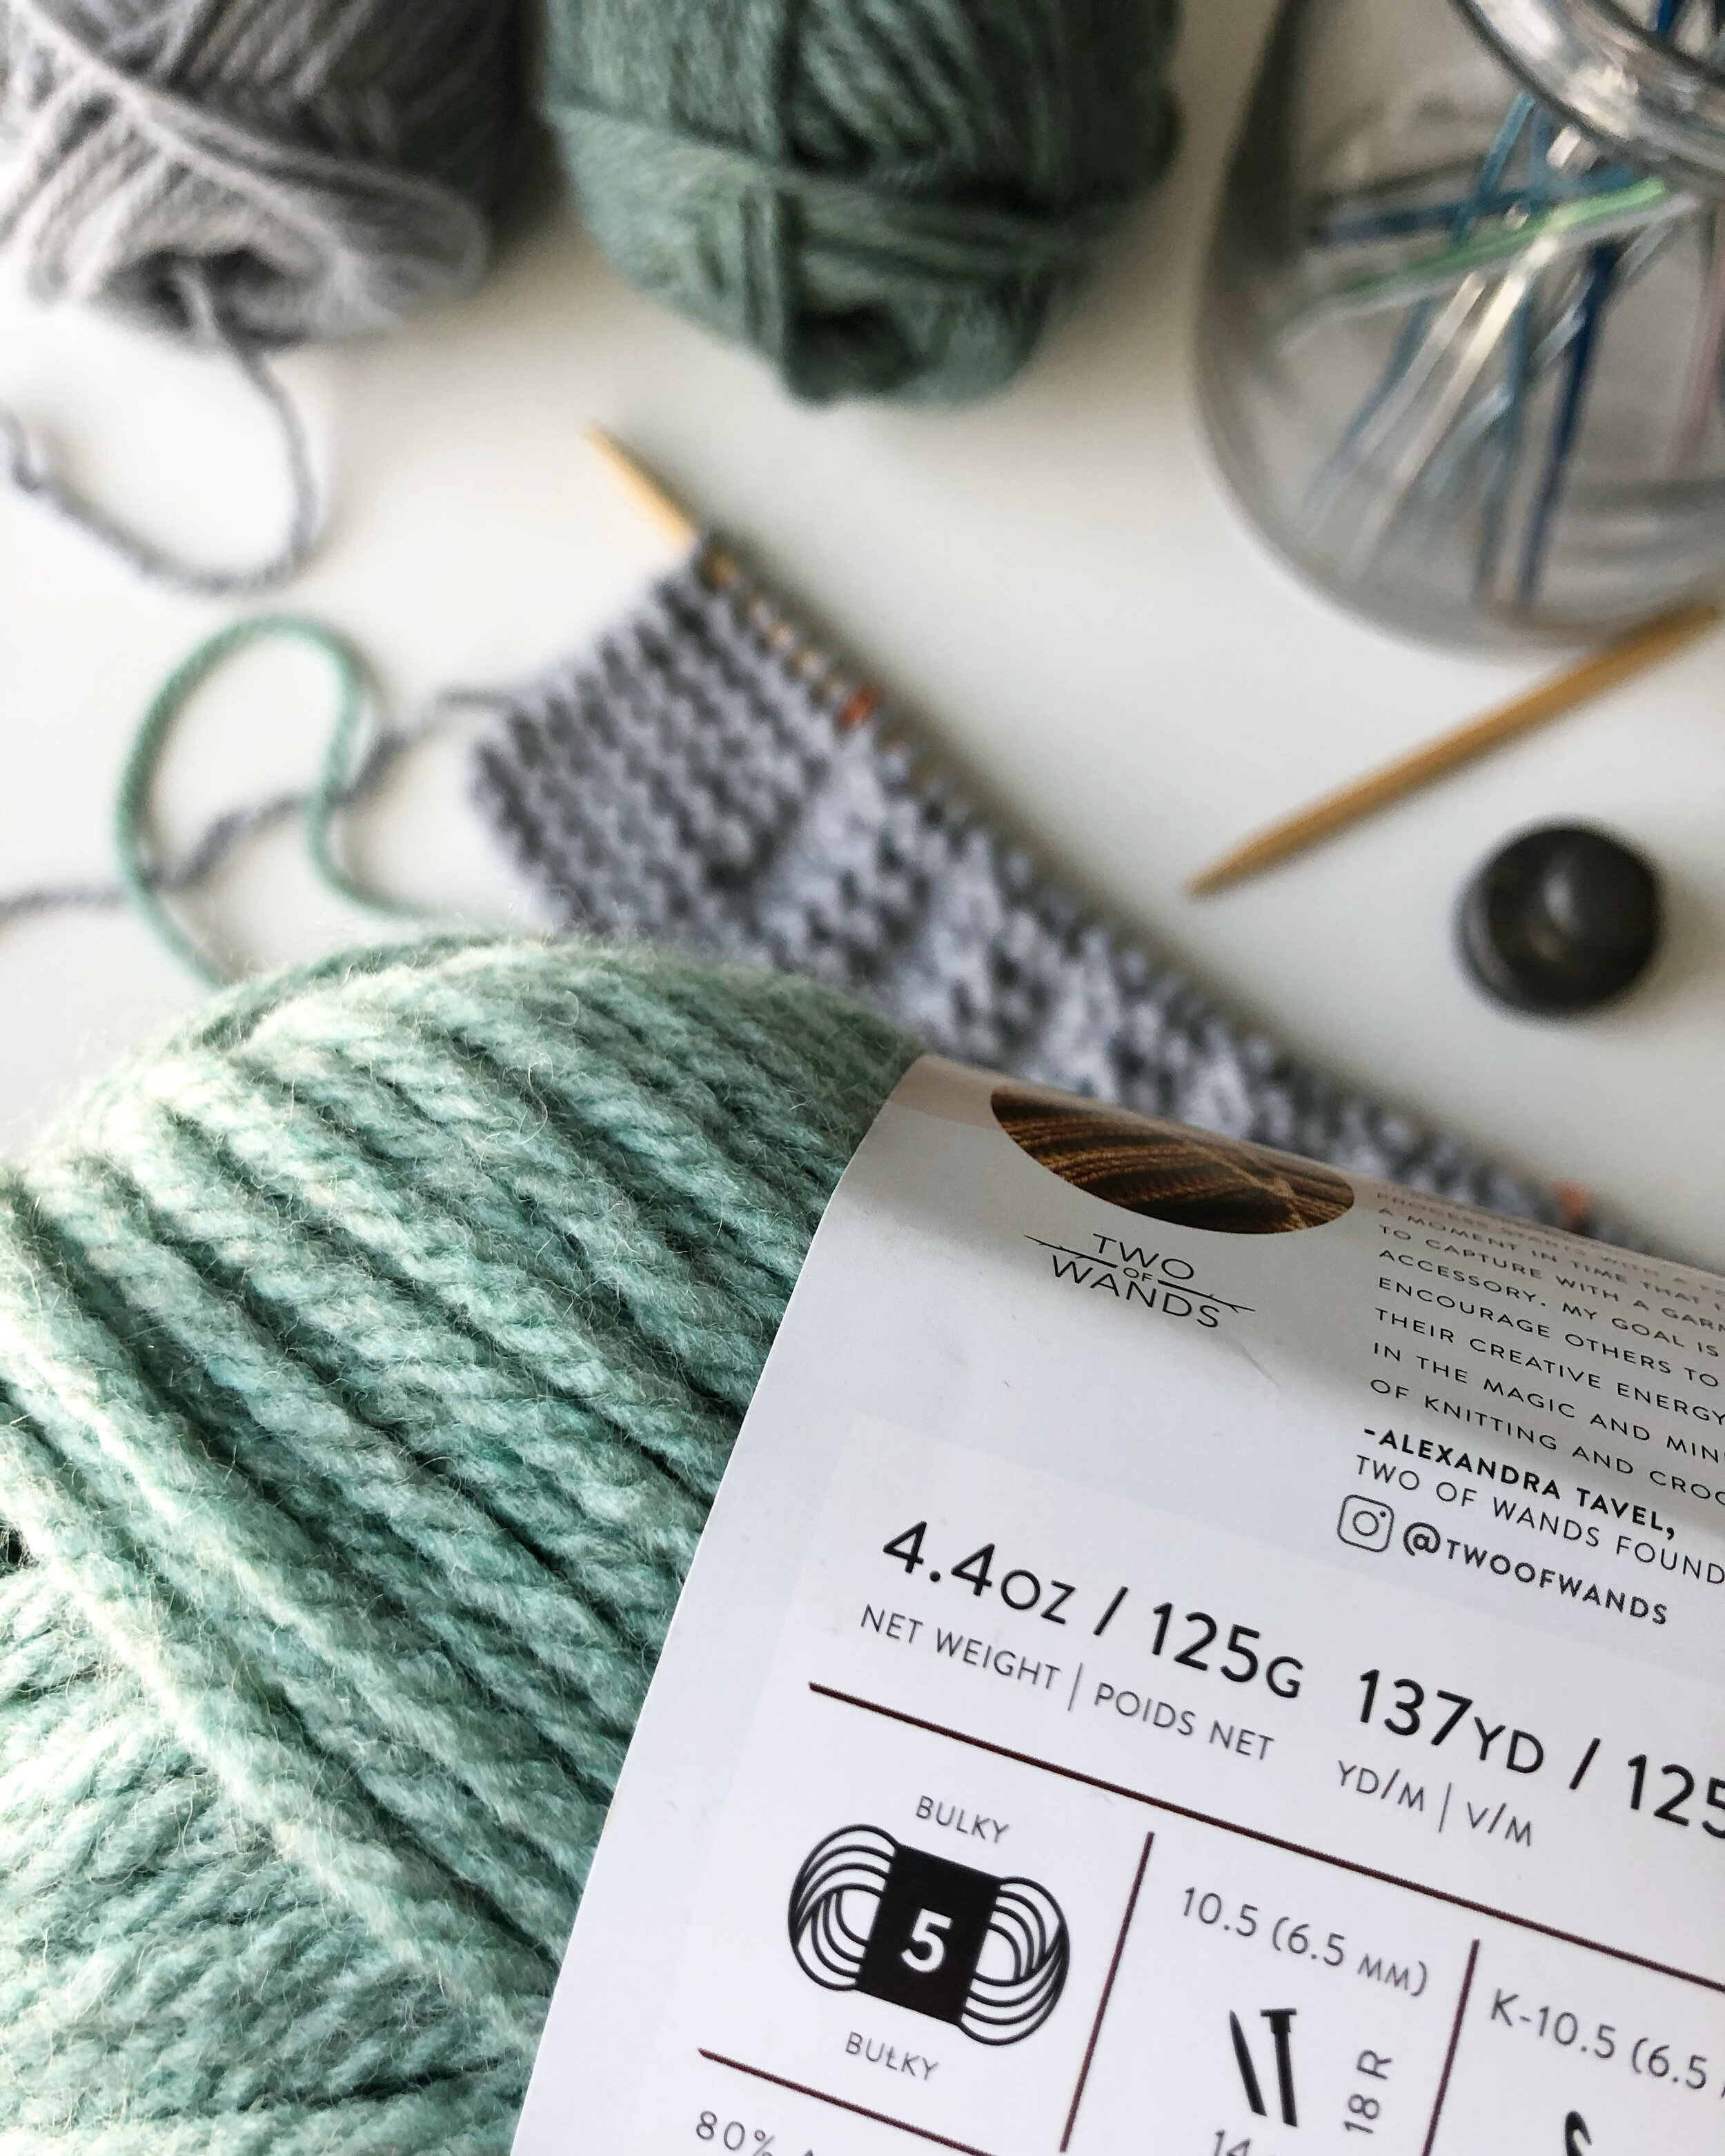 How to Choose the Best Type of Yarn for Your Giant Knitting